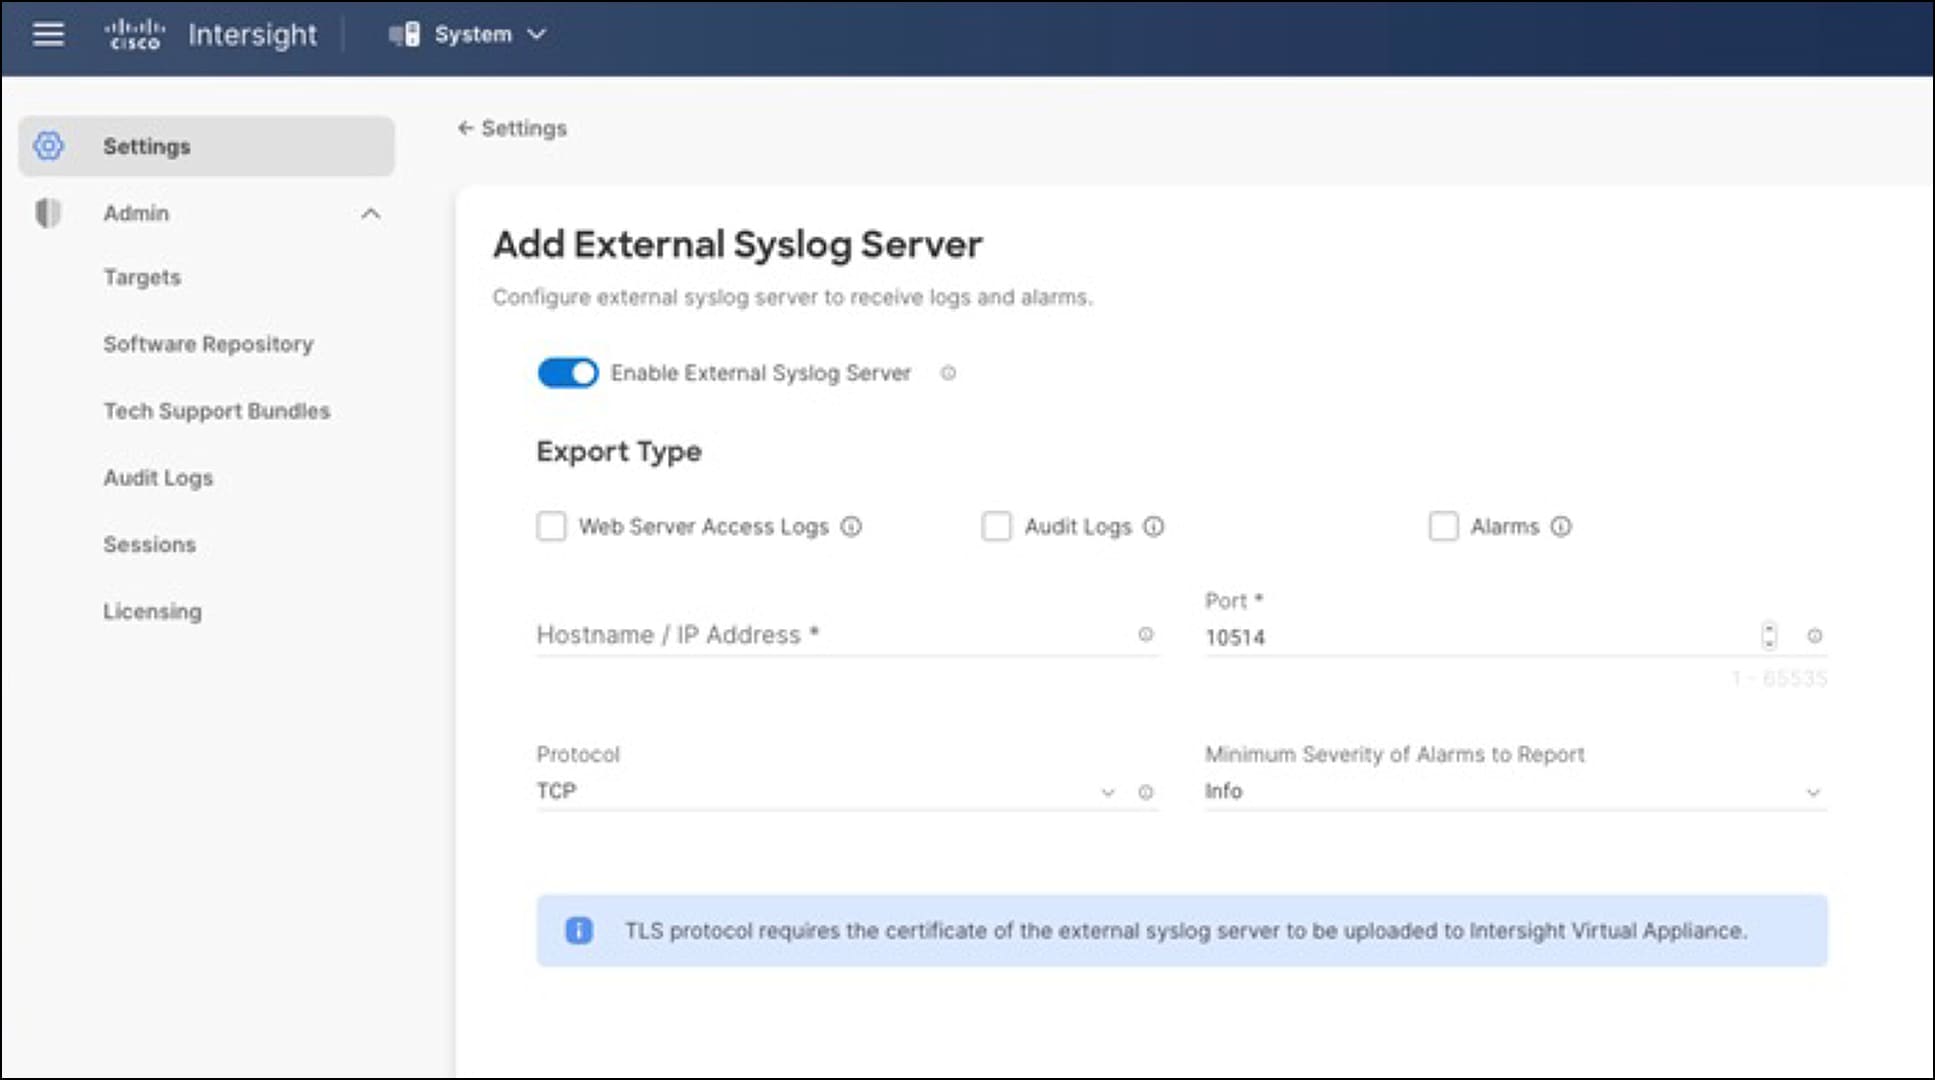 External syslog policy for Intersight Virtual Appliance